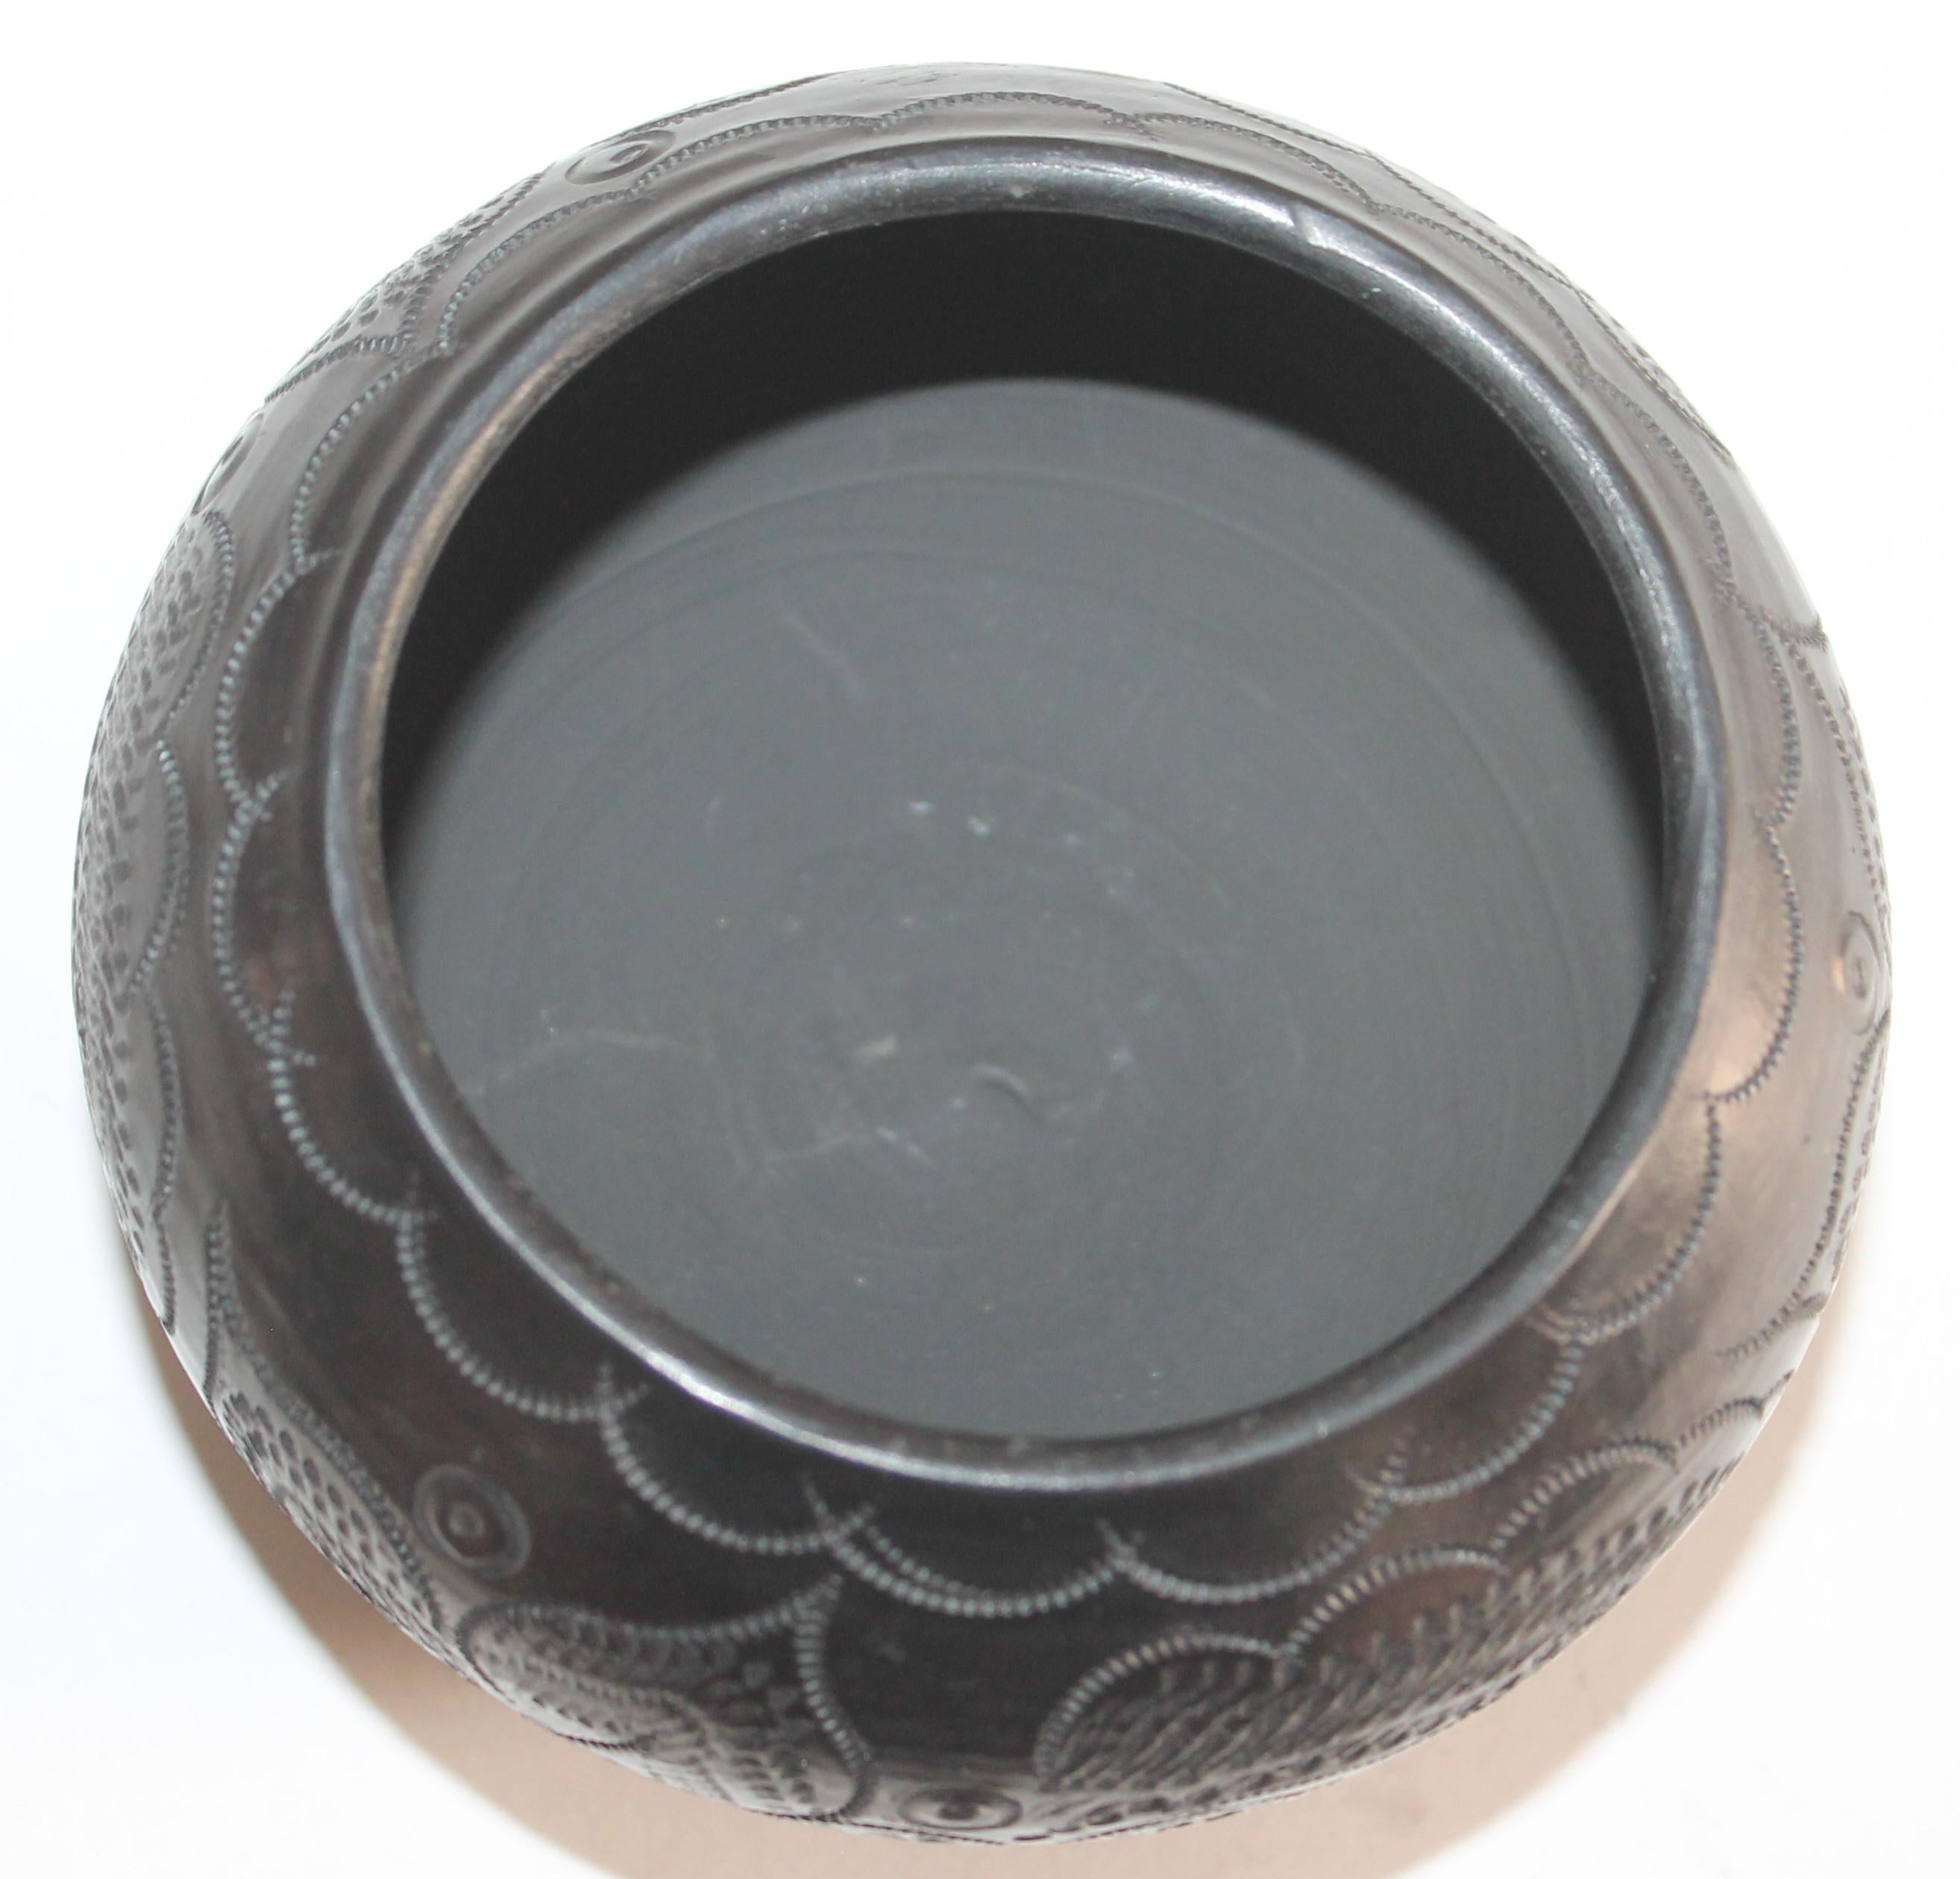 Signed Navajo Indian pottery bowl in fine condition. The black glazed pot.